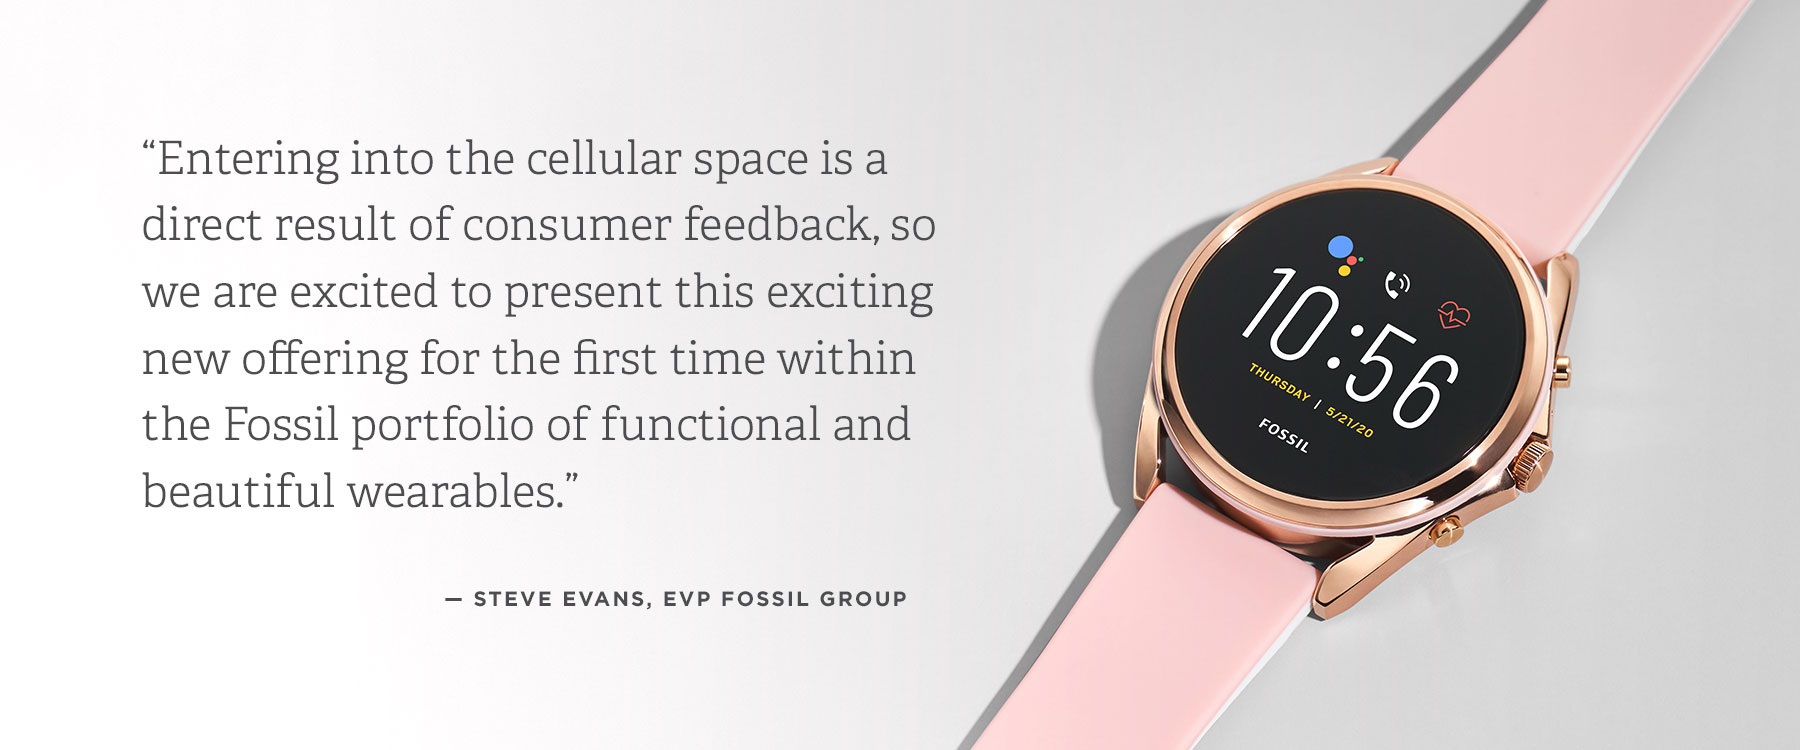 Fossil Launches LTE Expands Gen 5E to Michael Kors and Hybrid HR to Skagen   Fossil Group